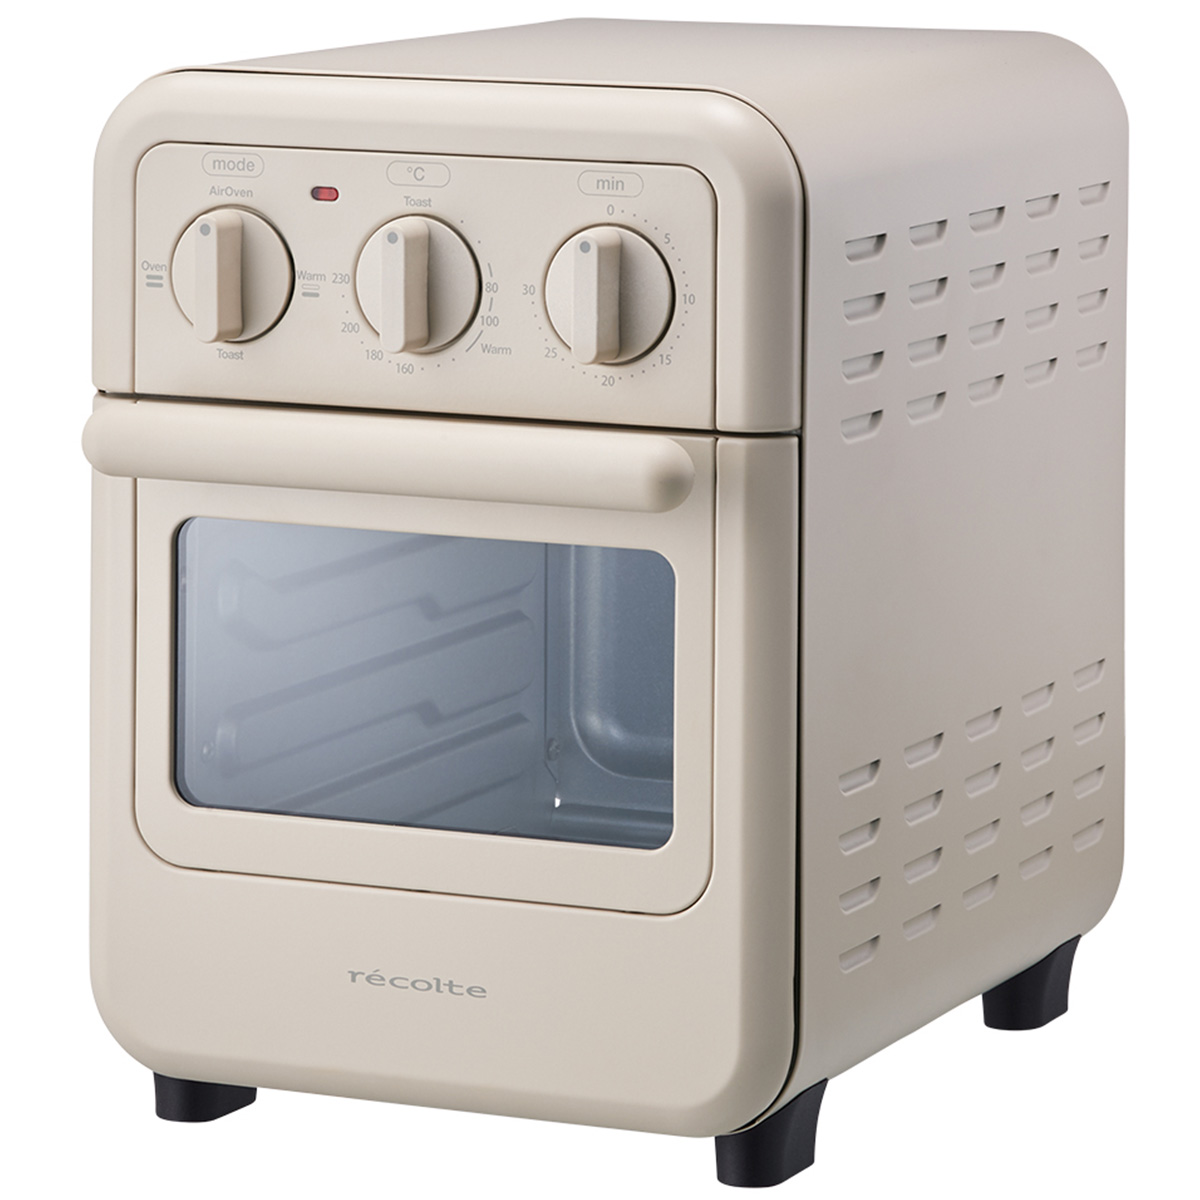 Air Oven Toaster エアーオーブントースター クリームホワイト　RFT-1(W)